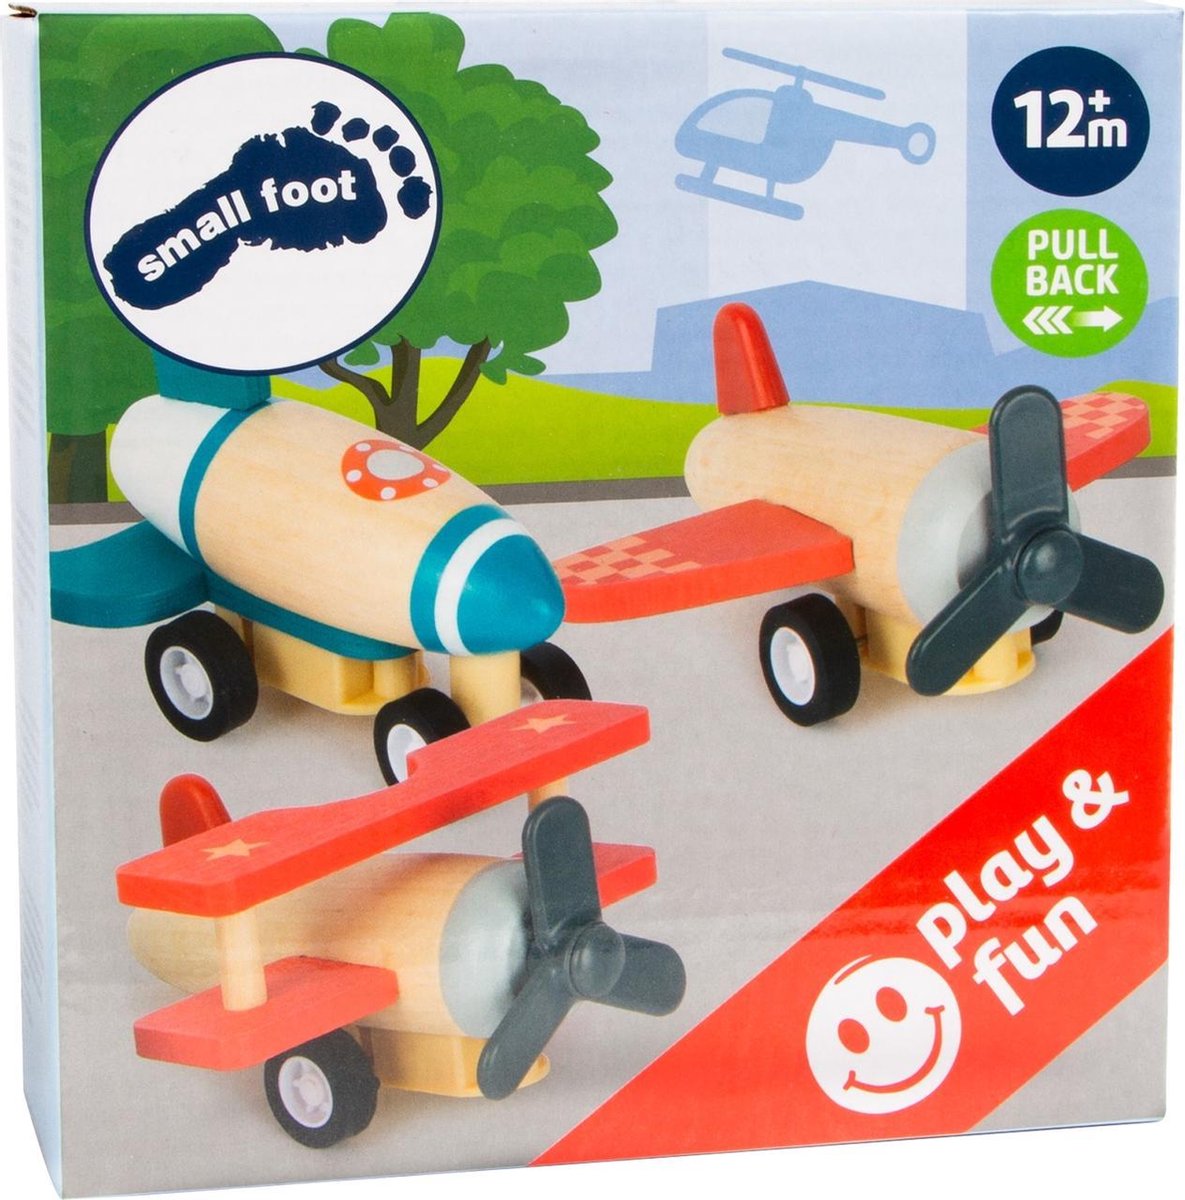 small foot - 3 'pull back' vliegtuigjes van hout